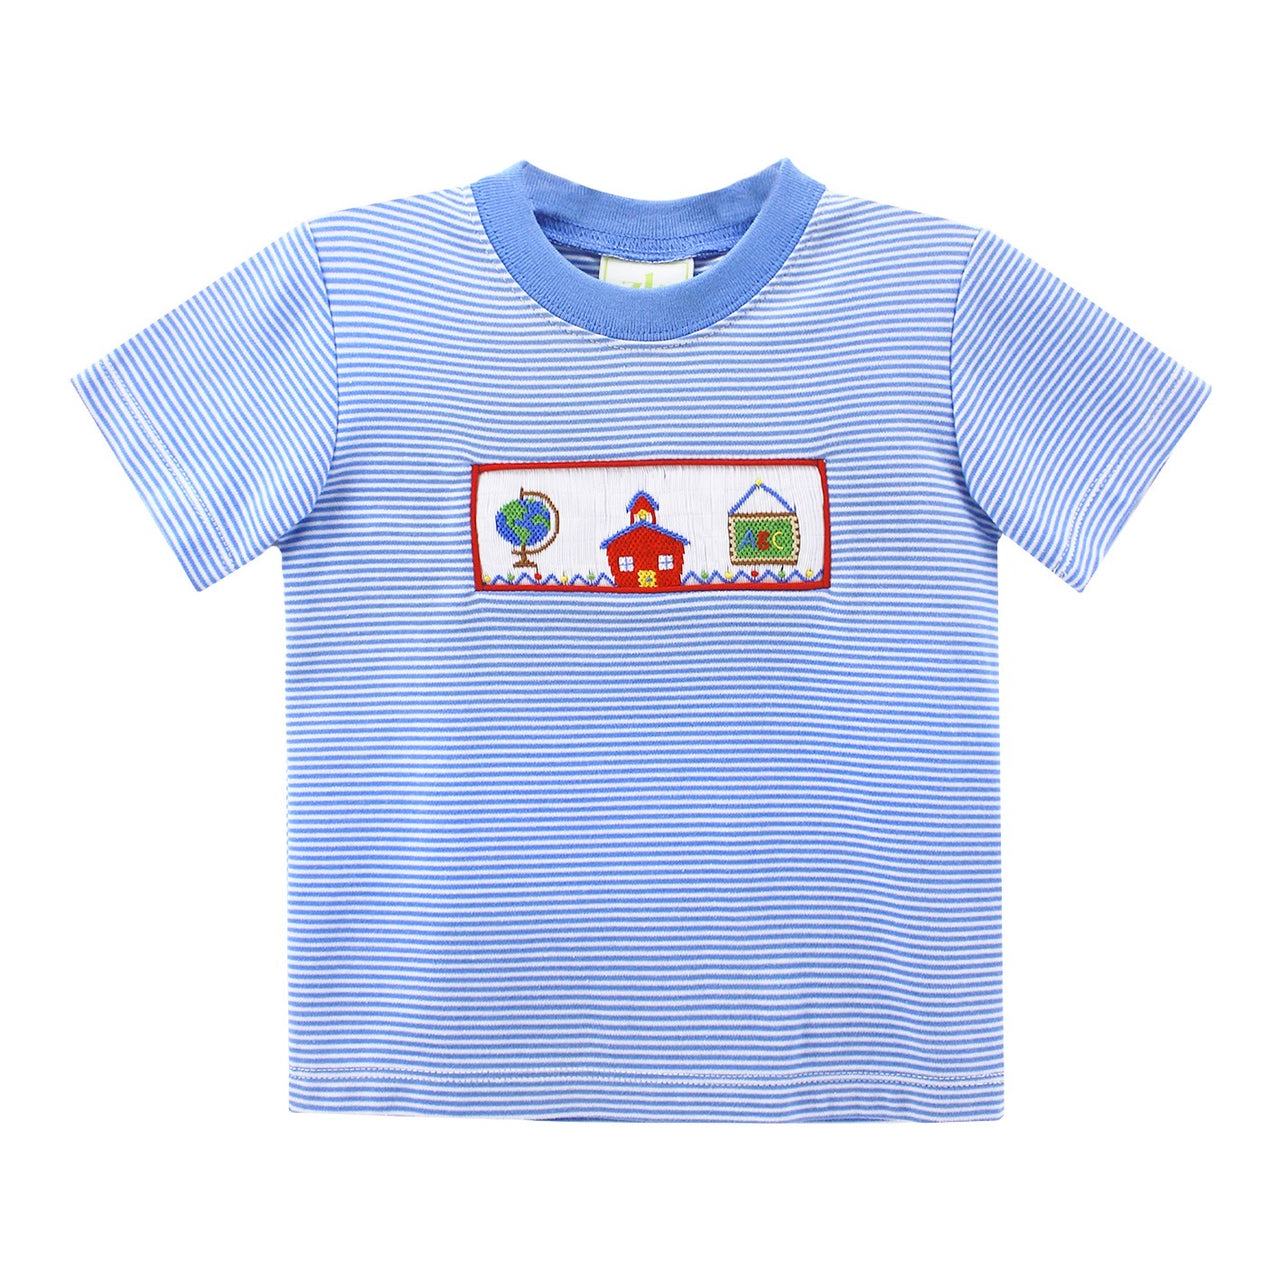 Zuccini School House Remus Play Tee Periwinkle Bitty Stripe Knit 5006